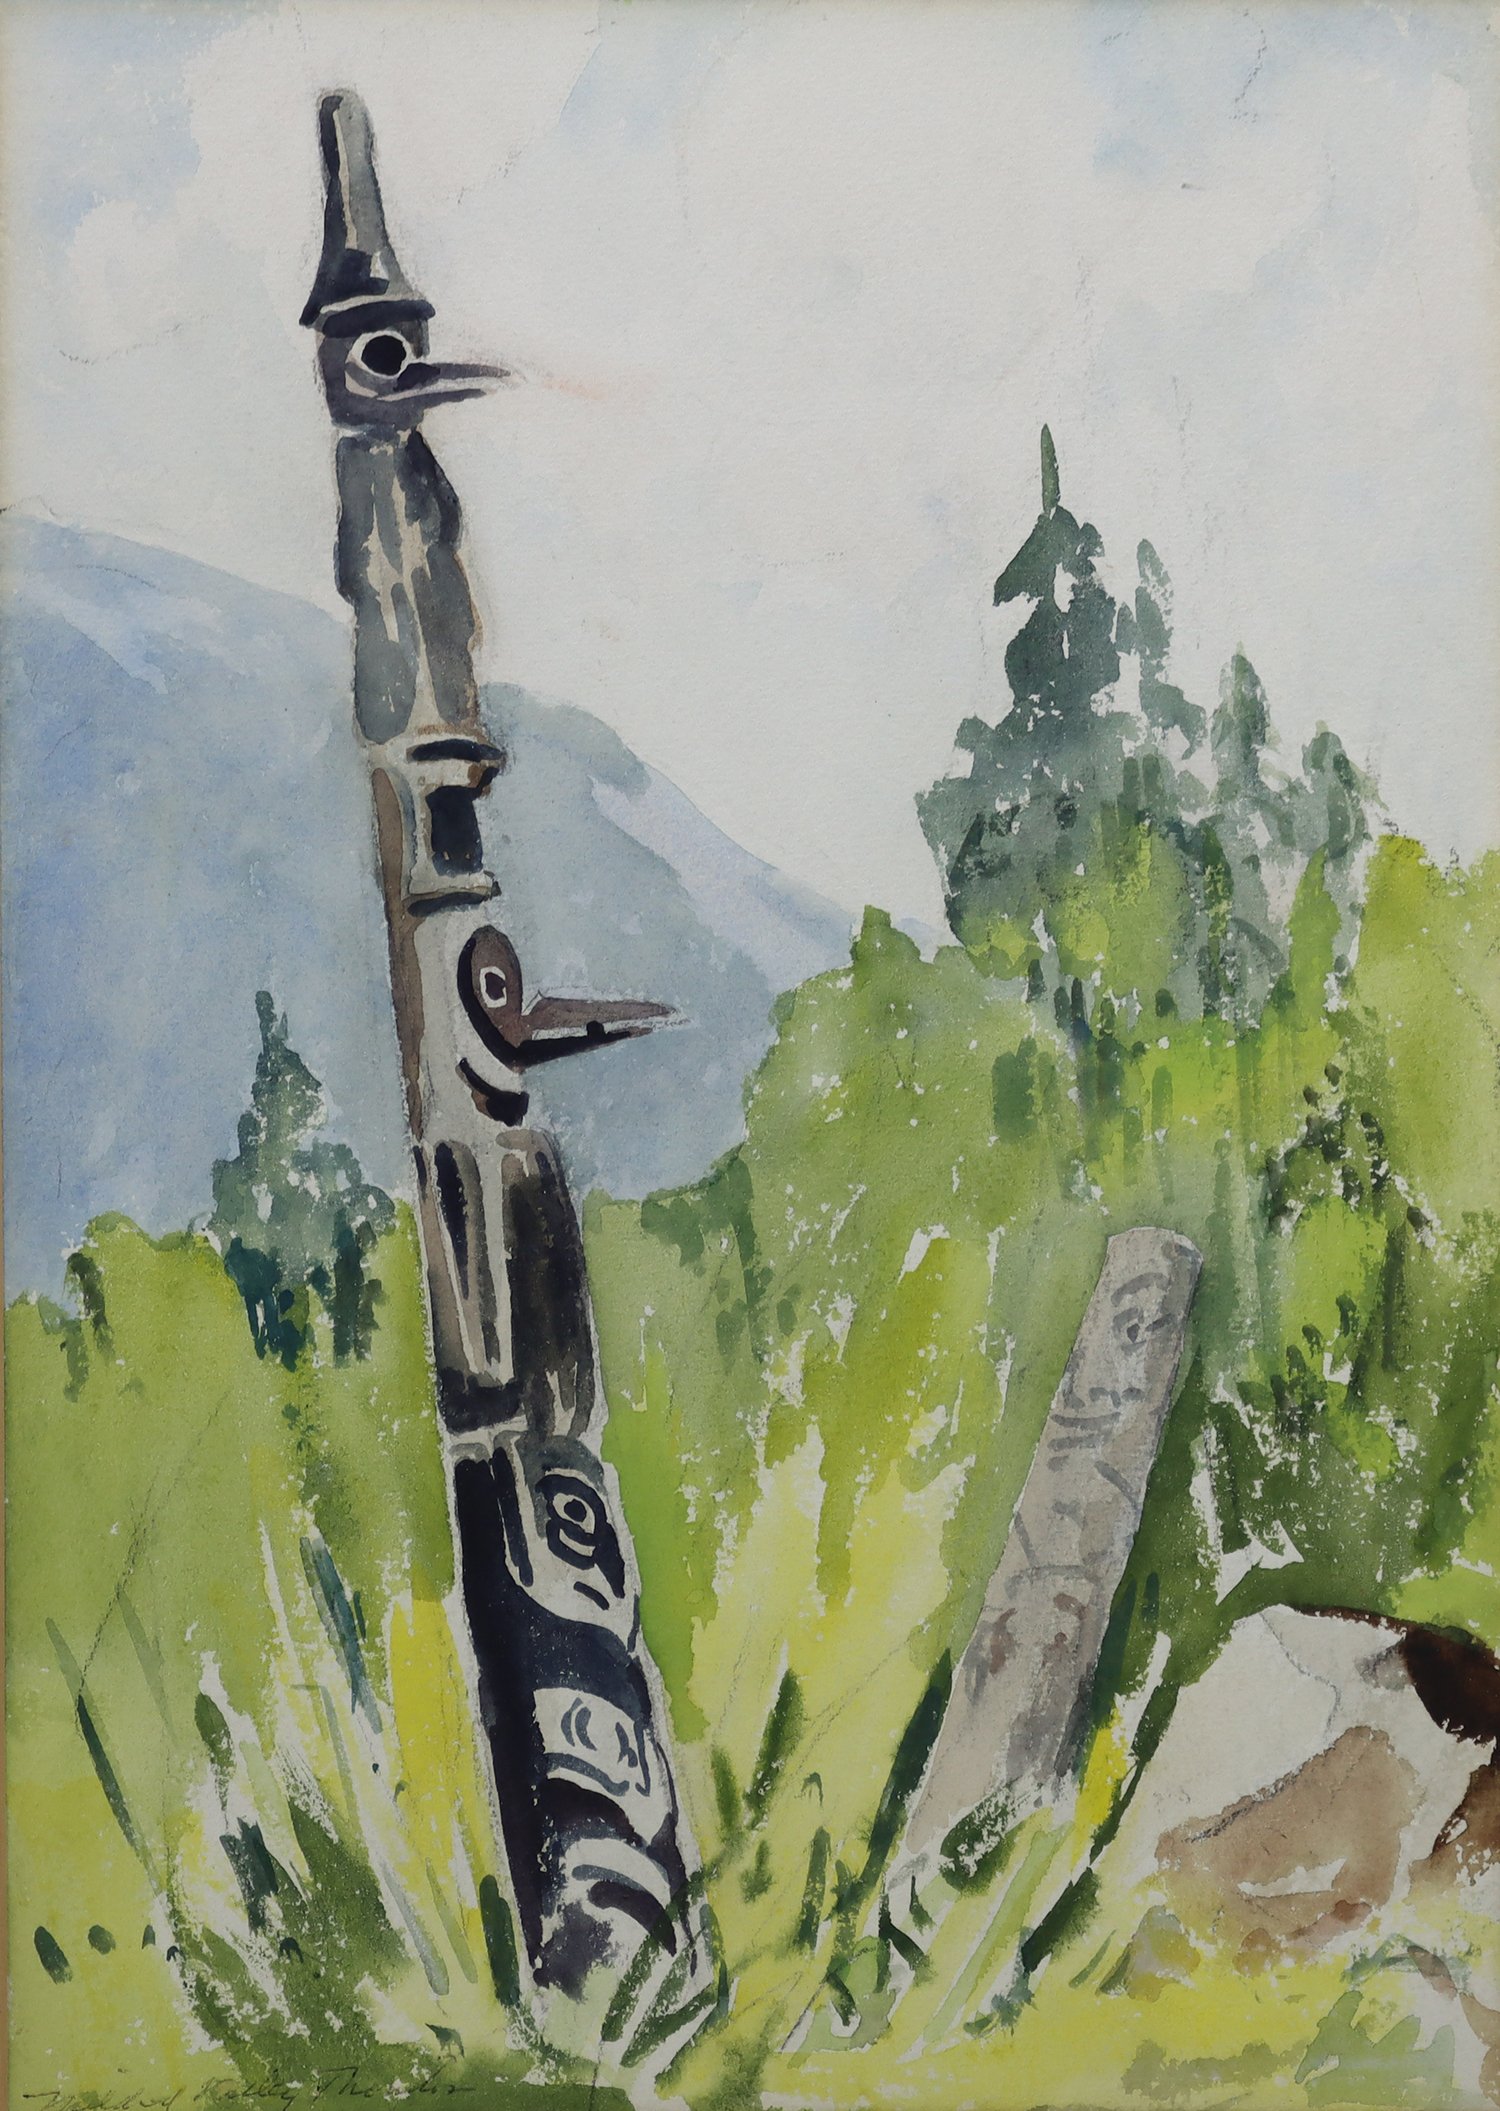 Totems in a Forest